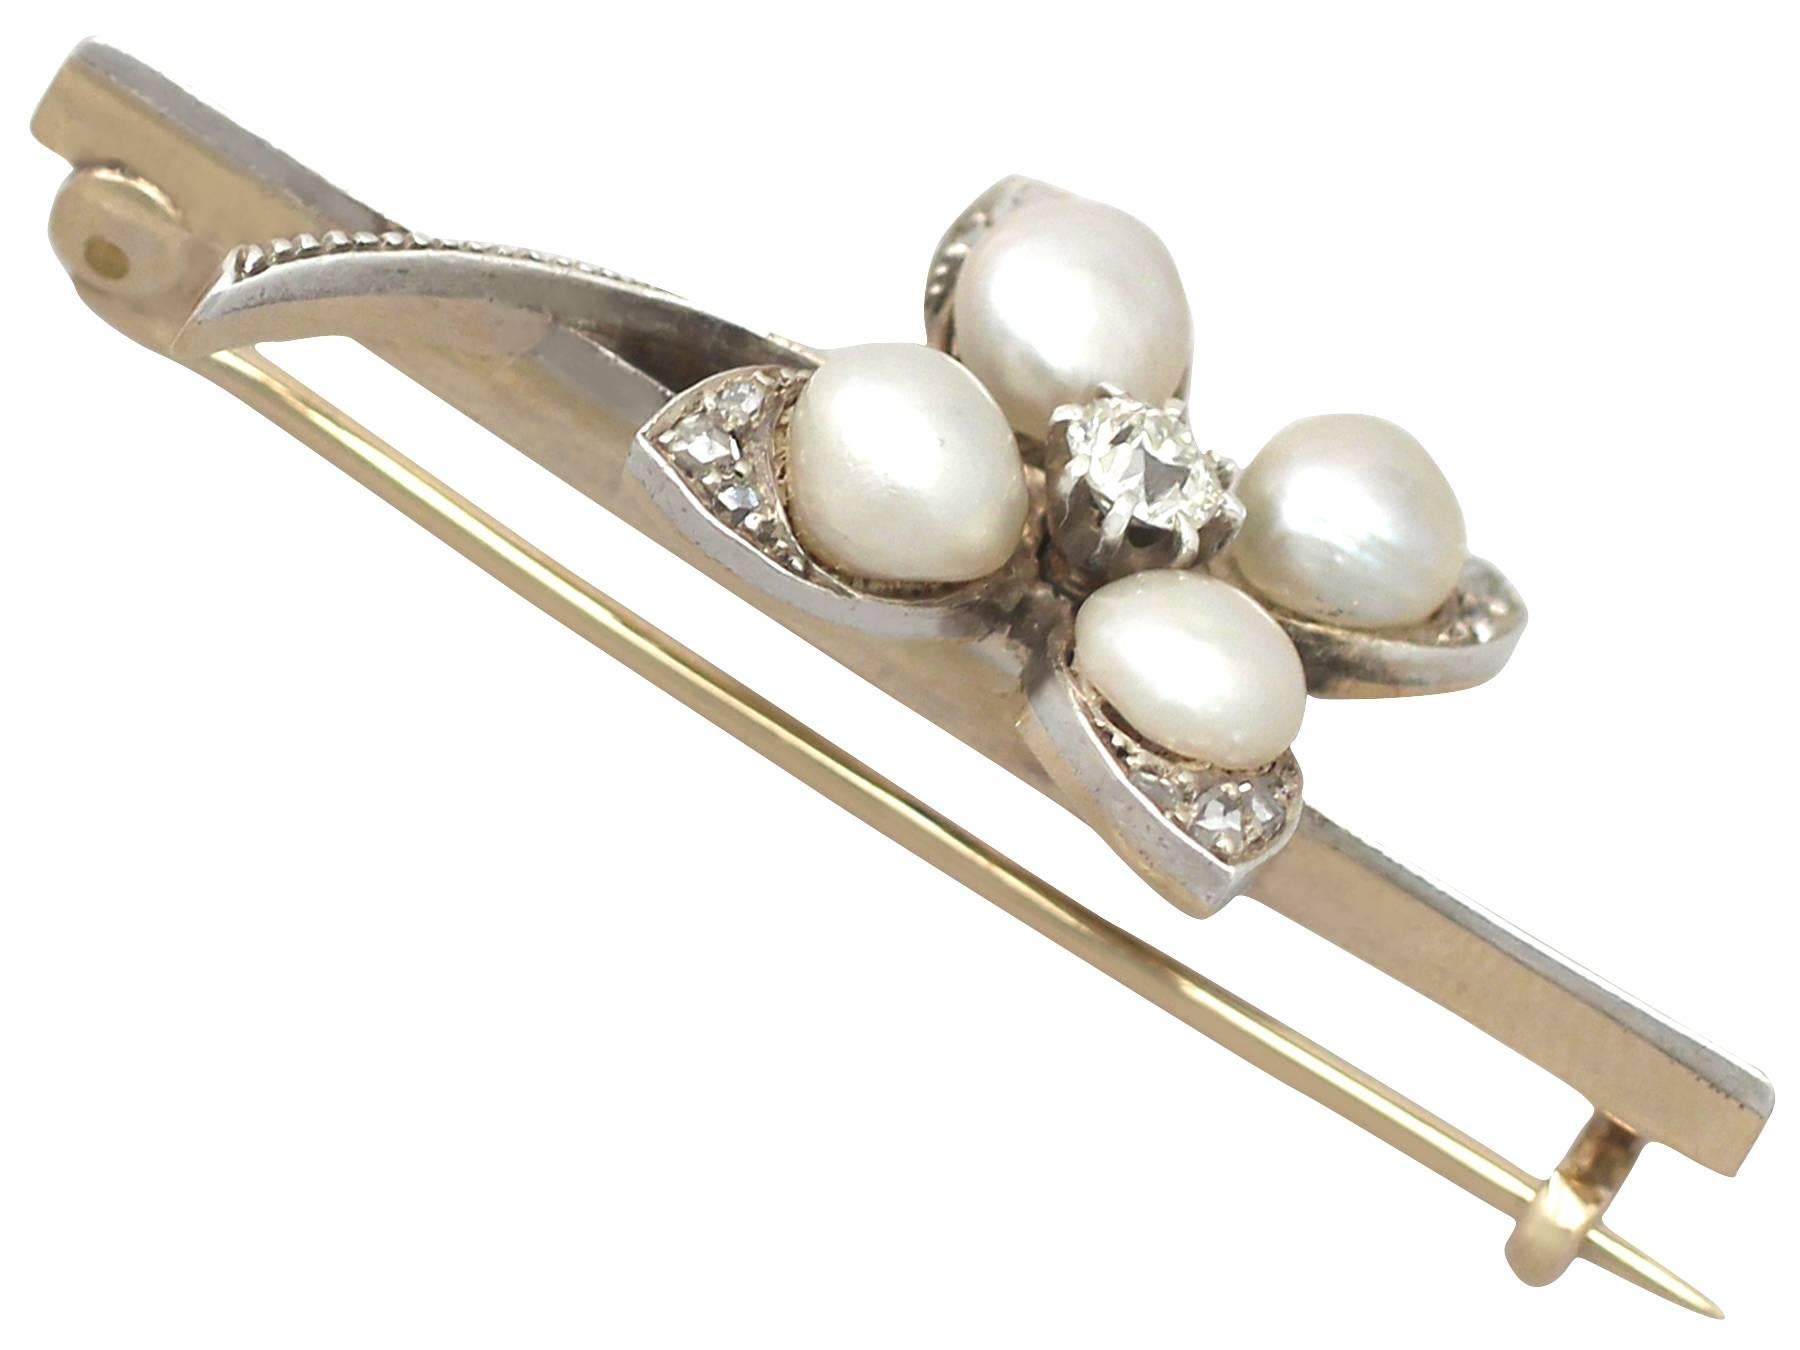 A fine and impressive antique 0.26 carat diamond and natural pearl, 12 karat yellow gold and silver set clover, bar style brooch; part of our antique jewelry/estate jewelry collections.

This fine and impressive antique Victorian clover brooch has